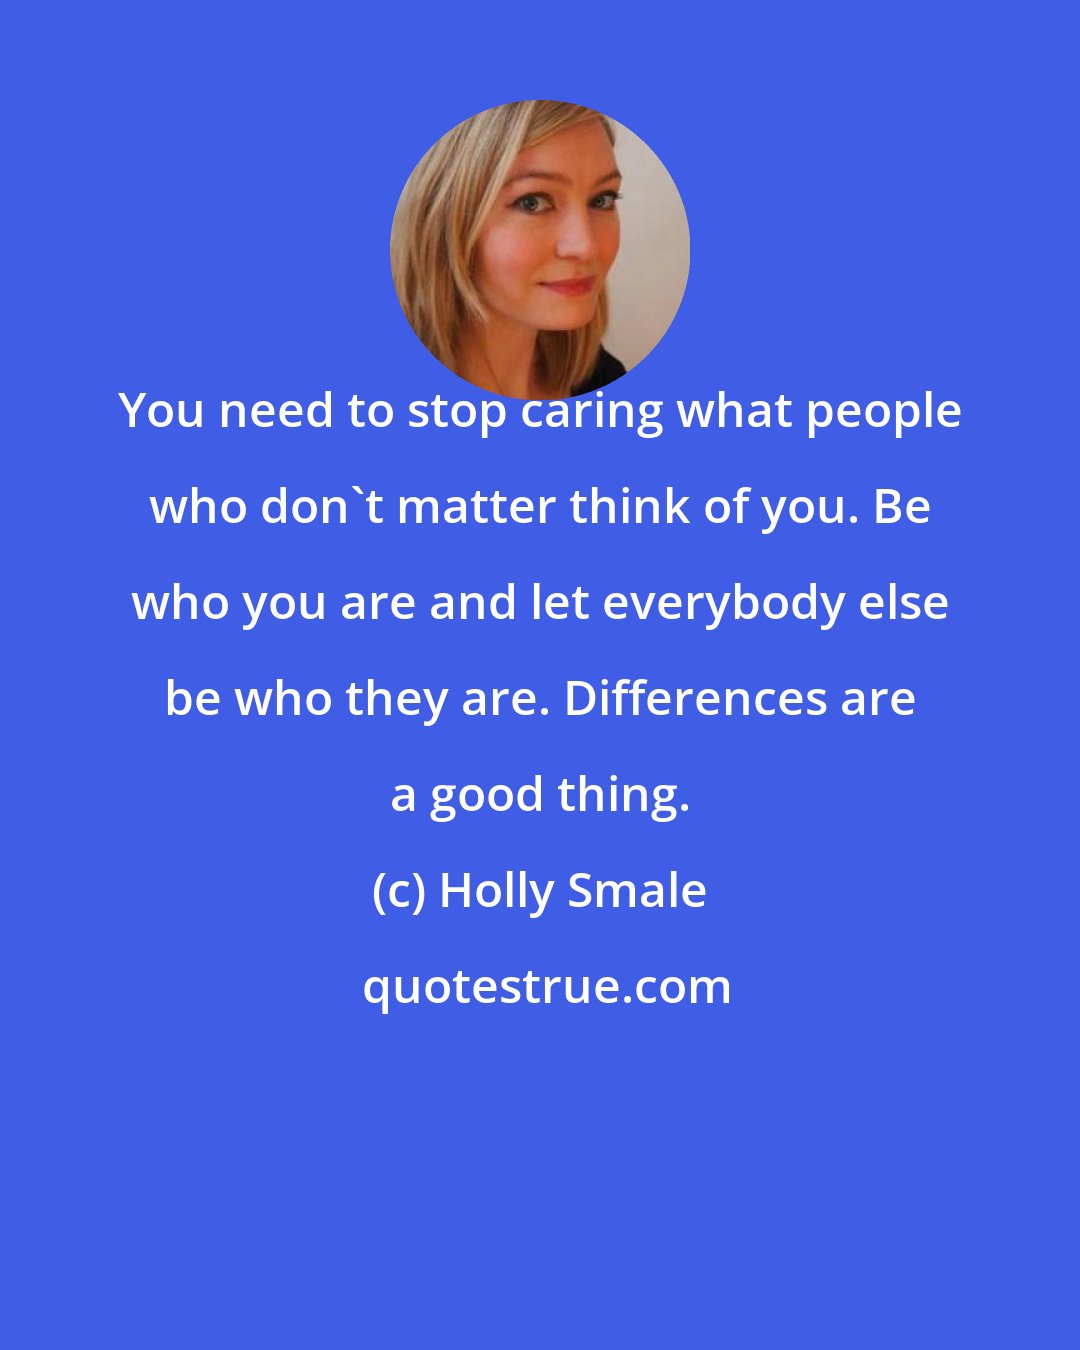 Holly Smale: You need to stop caring what people who don't matter think of you. Be who you are and let everybody else be who they are. Differences are a good thing.